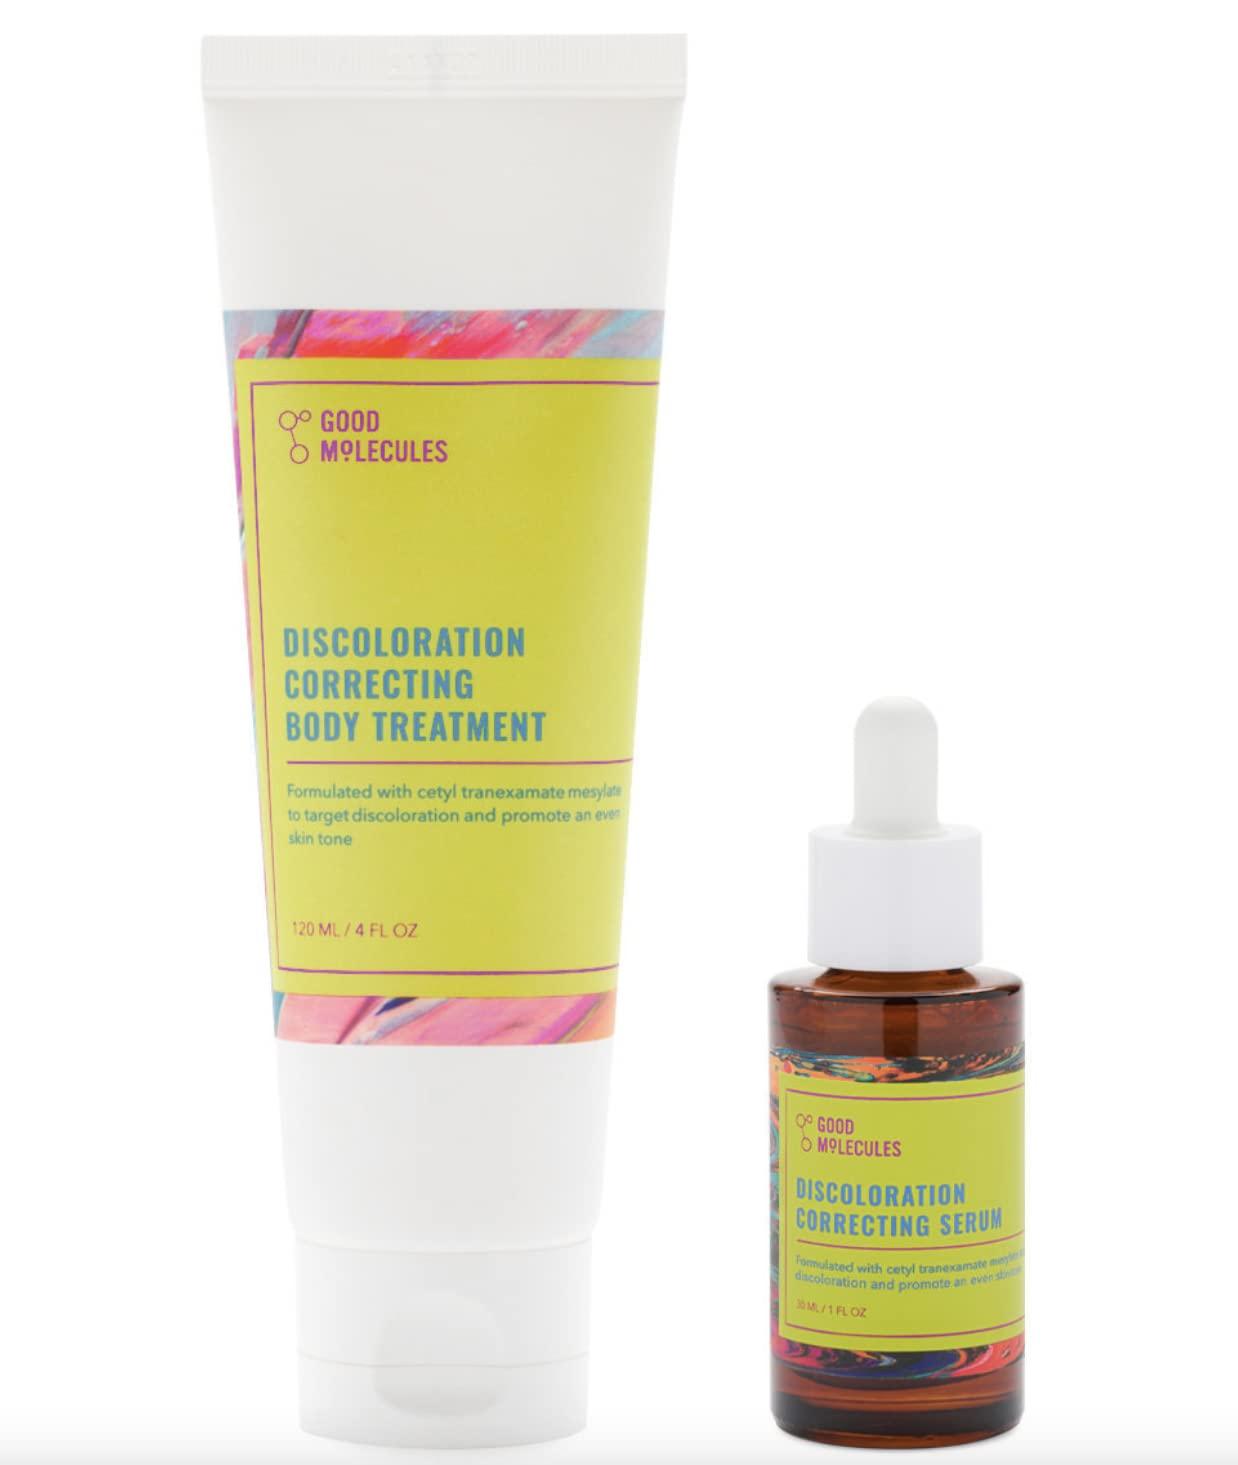 Good Molecules Discoloration Correcting Face Serum (30 ml) and